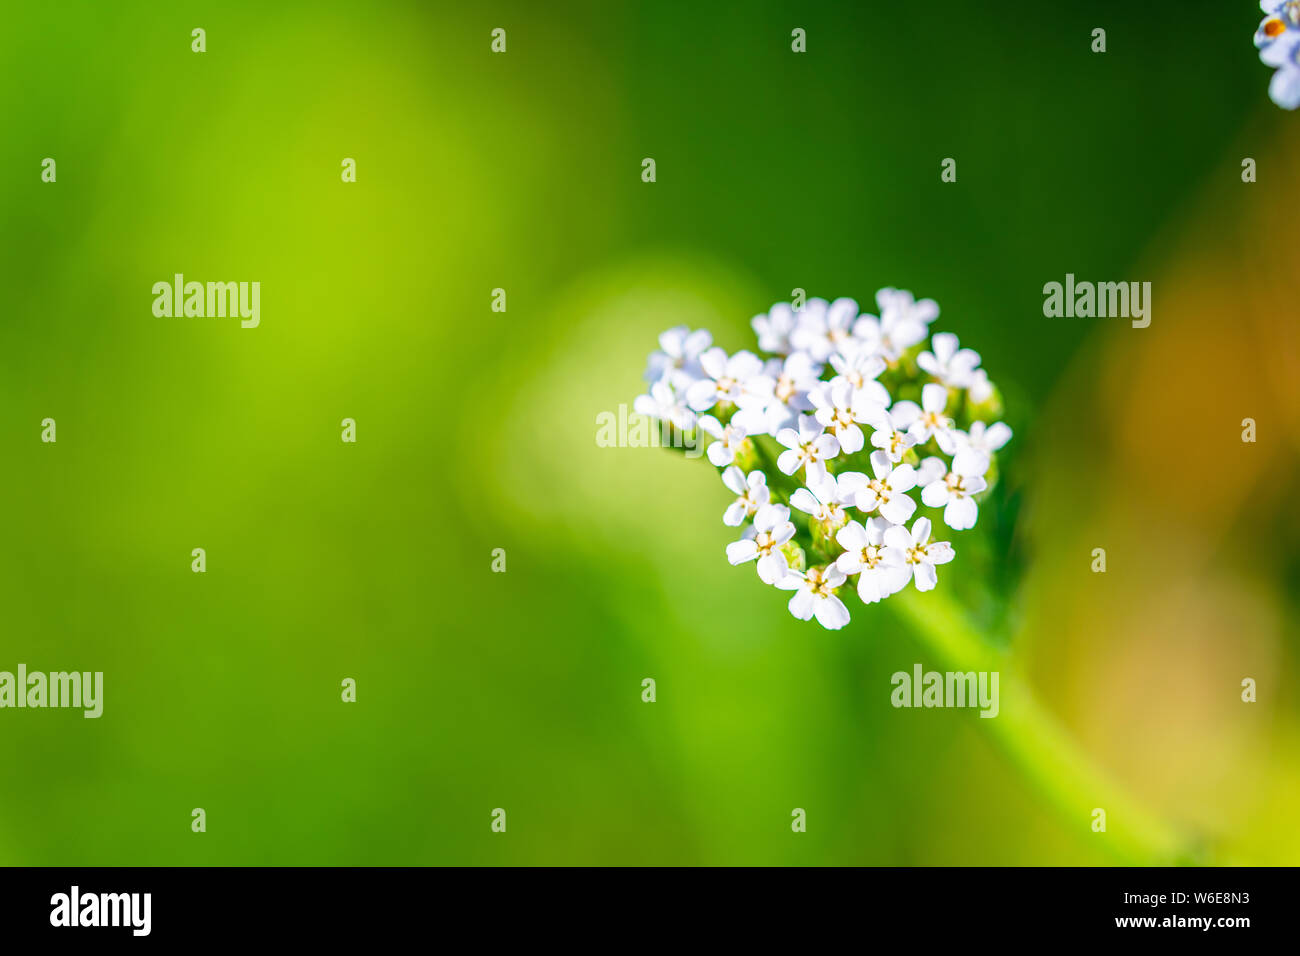 Glowing flowers are in focus Stock Photo